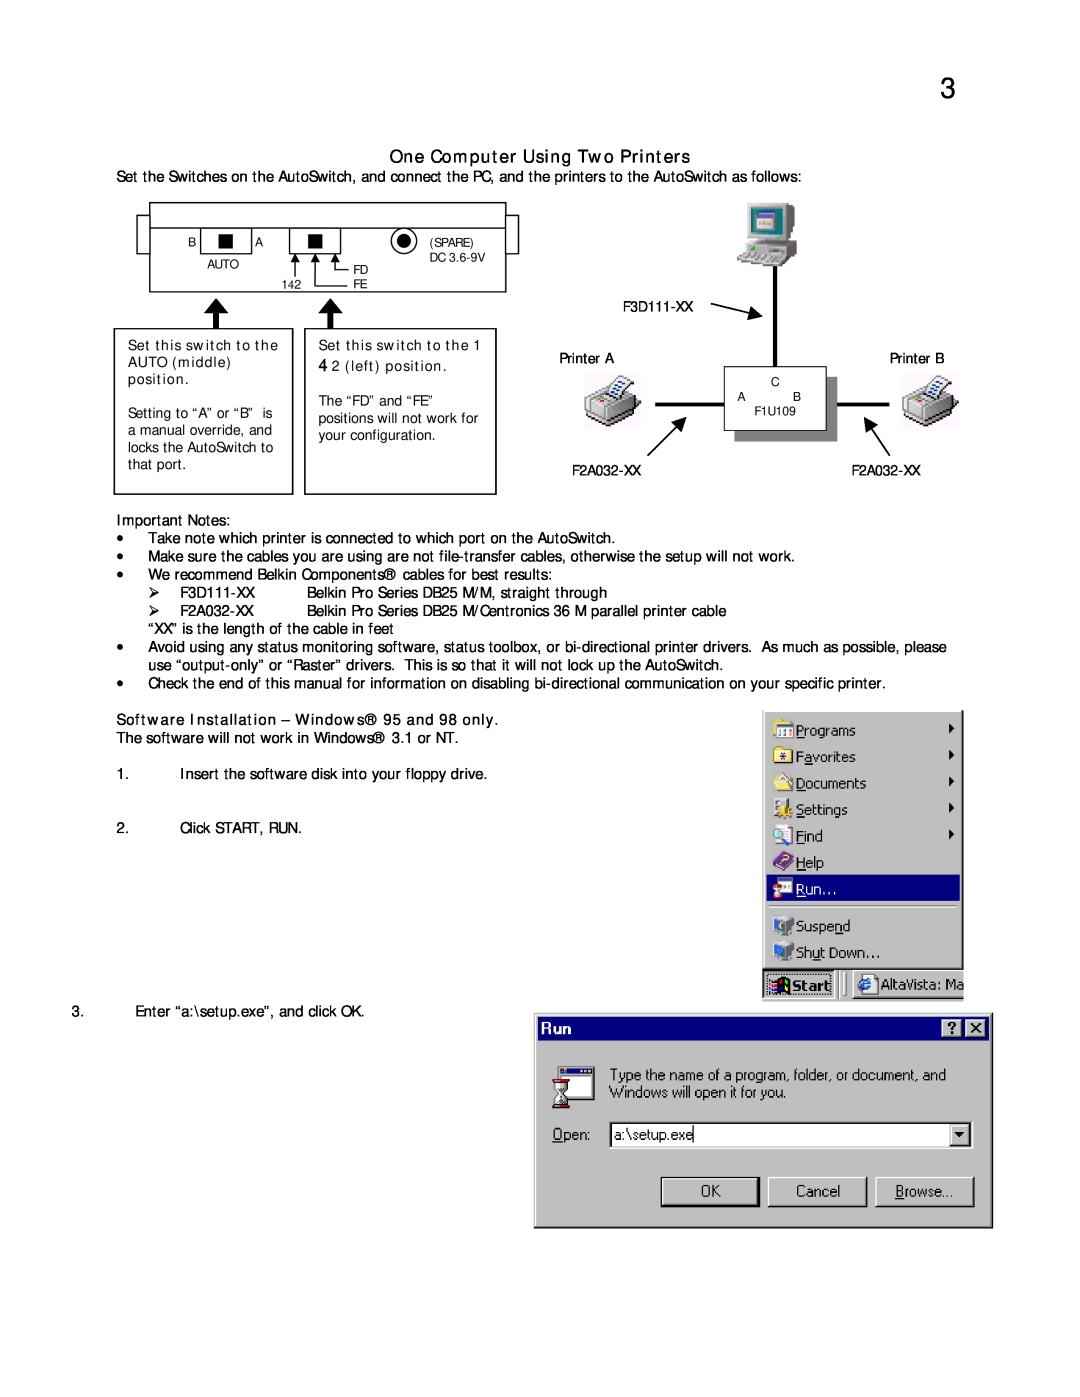 Belkin F1U109 user manual One Computer Using Two Printers, Set this switch to the 4 2 left position, F2A032-XX 